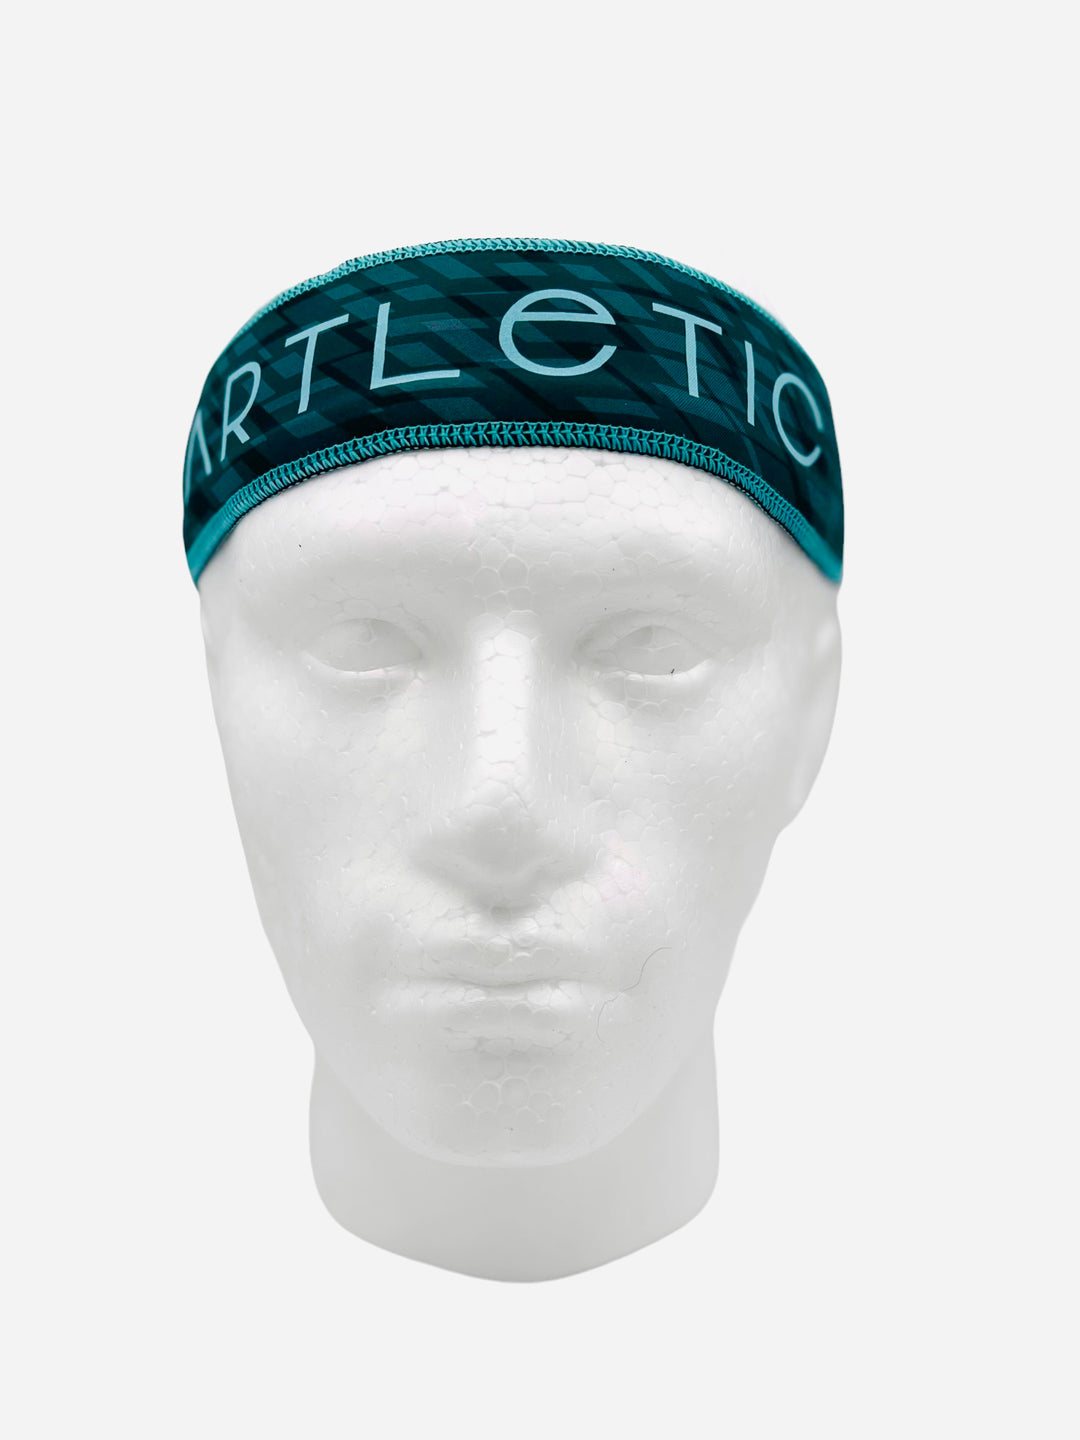 Artletic Teal Pullover Sweat Band